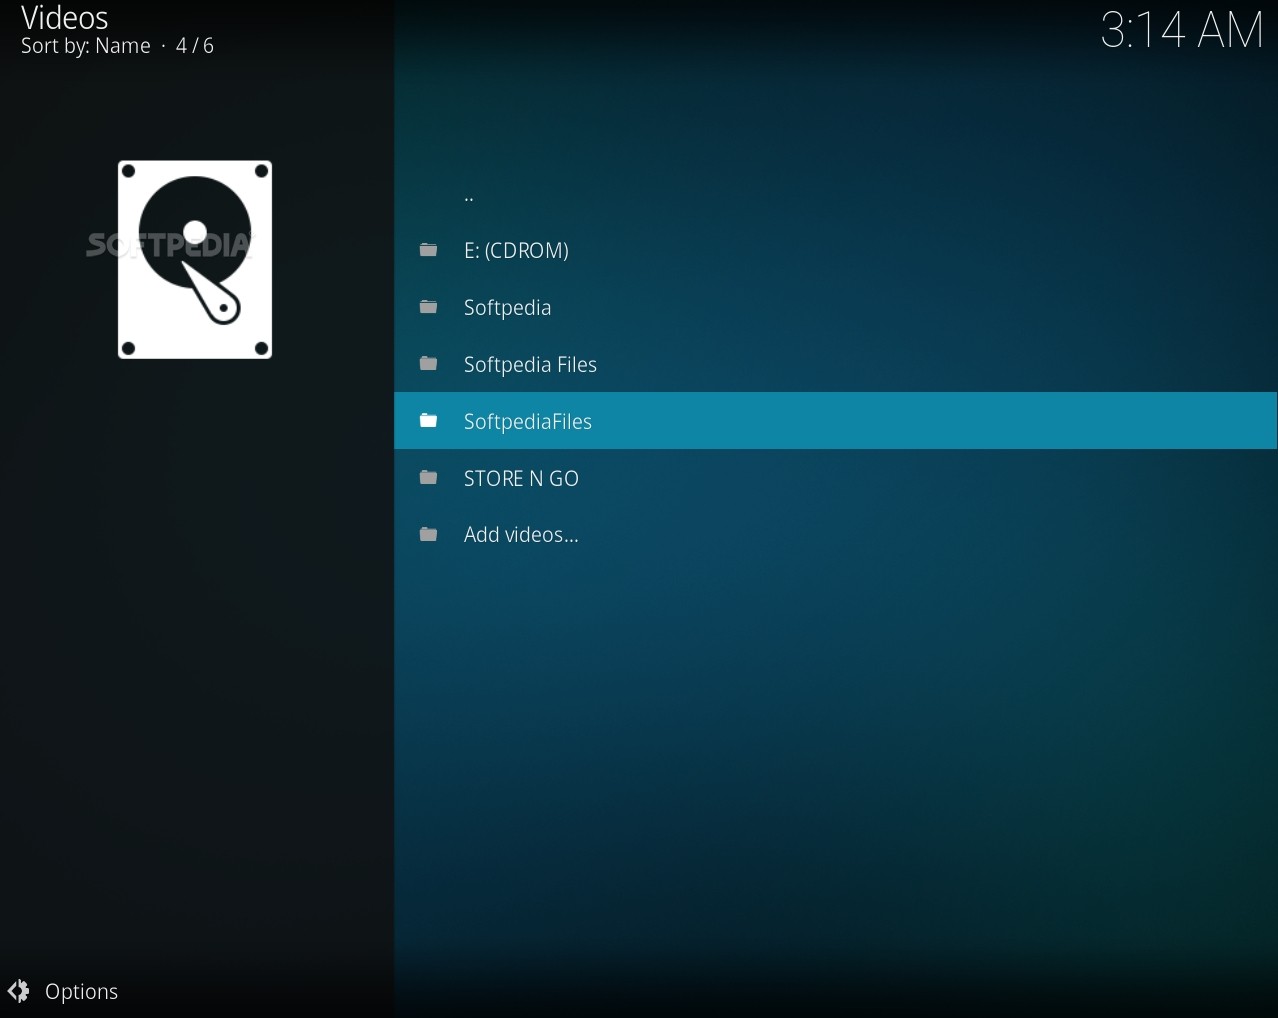 XBMC Media Center screenshot 2 - Users will be able to play any video file, in any format including Blu-ray and even ISO